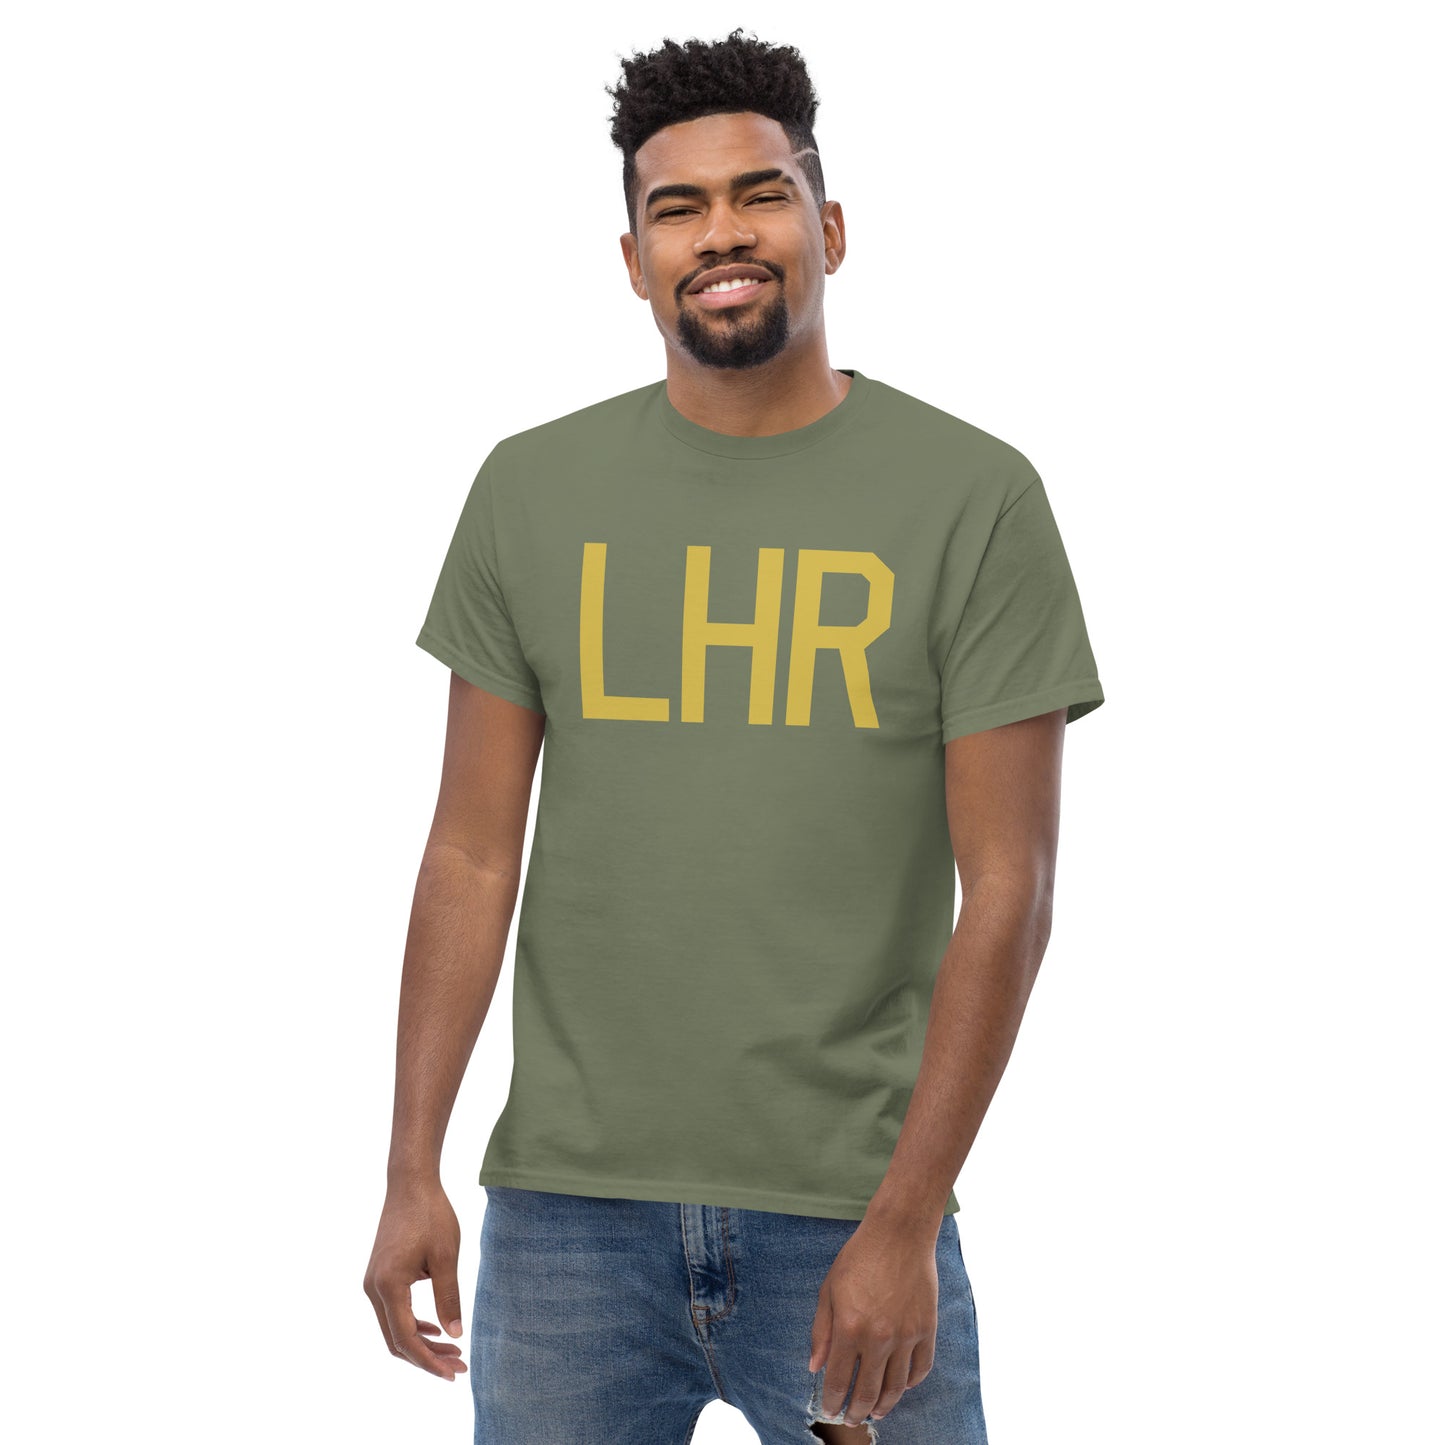 Aviation Enthusiast Men's Tee - Old Gold Graphic • LHR London • YHM Designs - Image 06